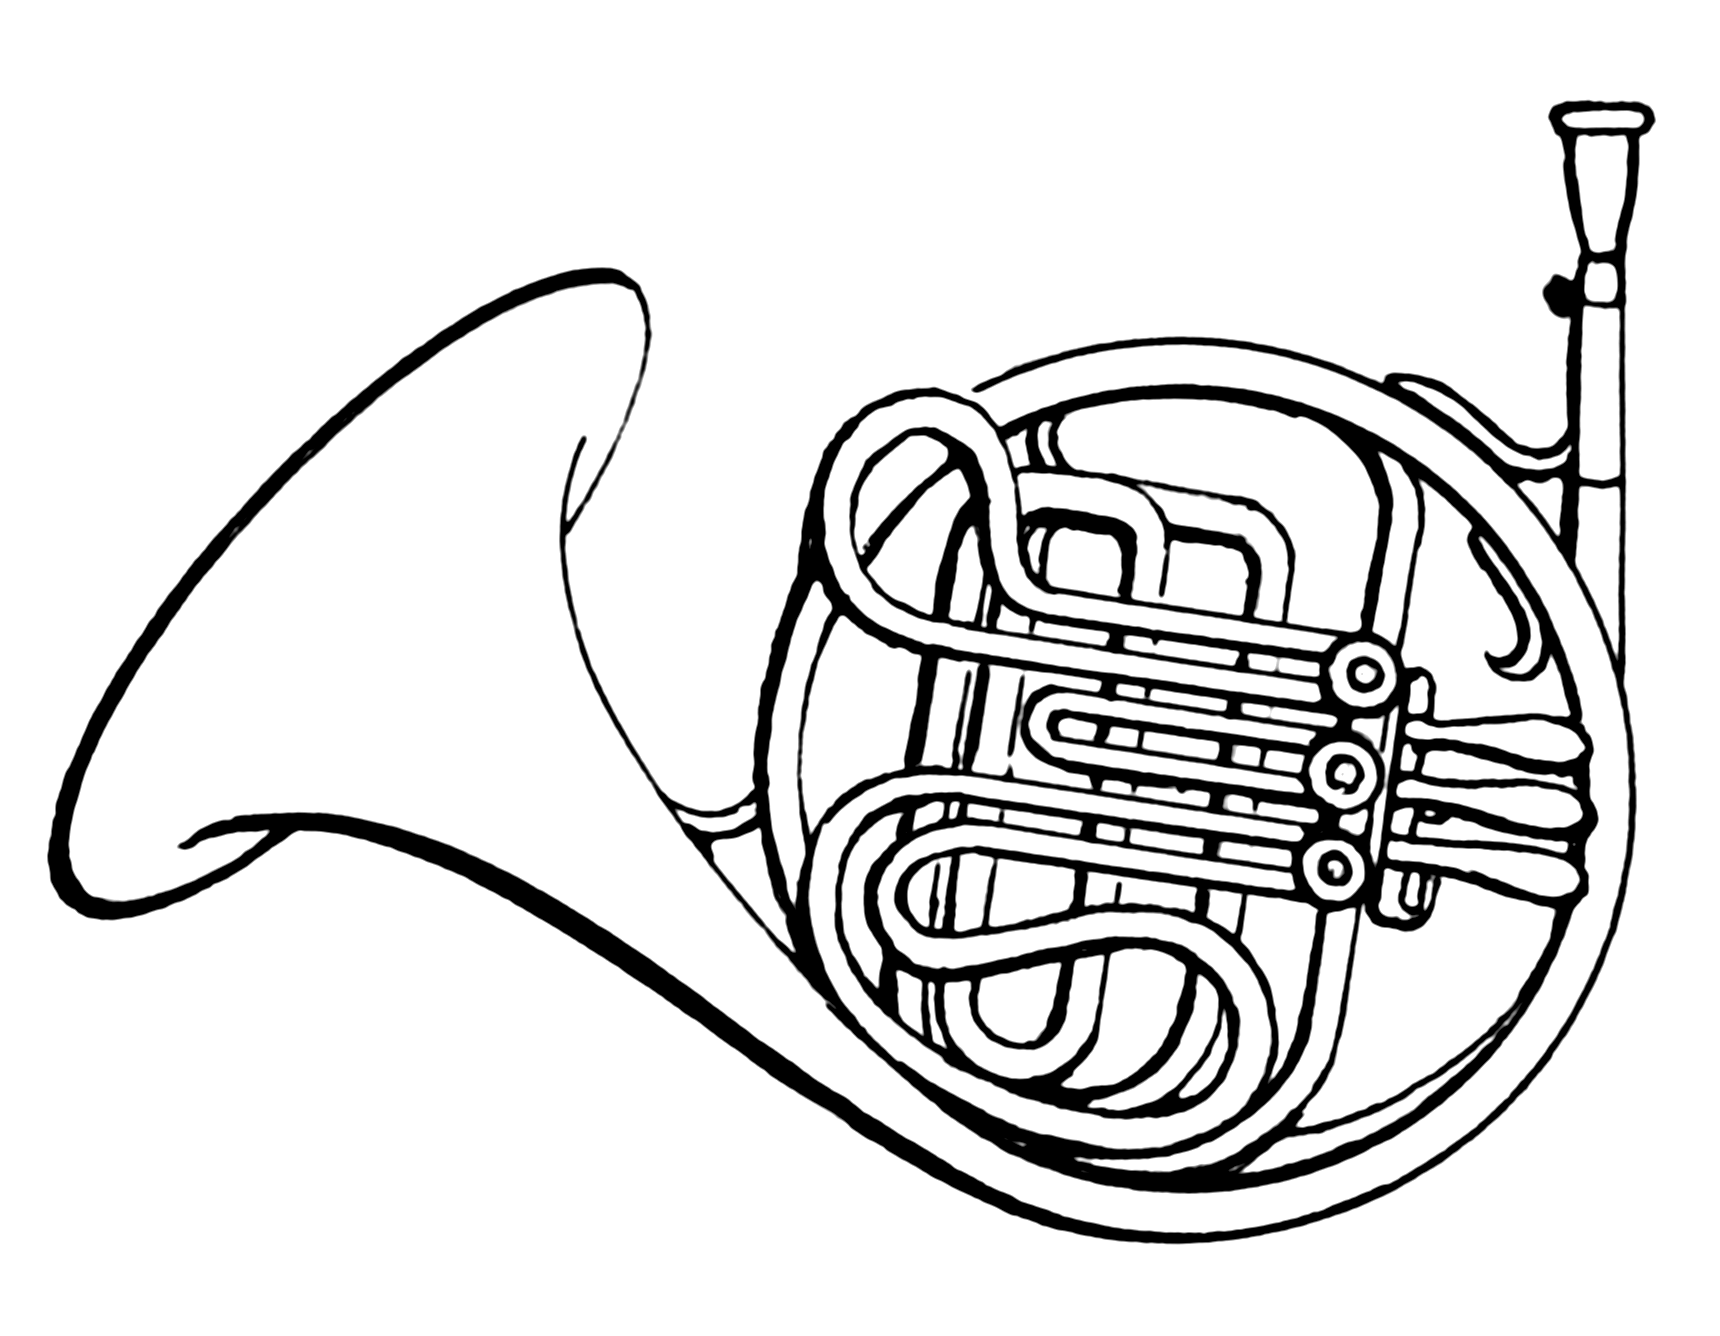 French Horn Drawing - ClipArt Best - ClipArt Best